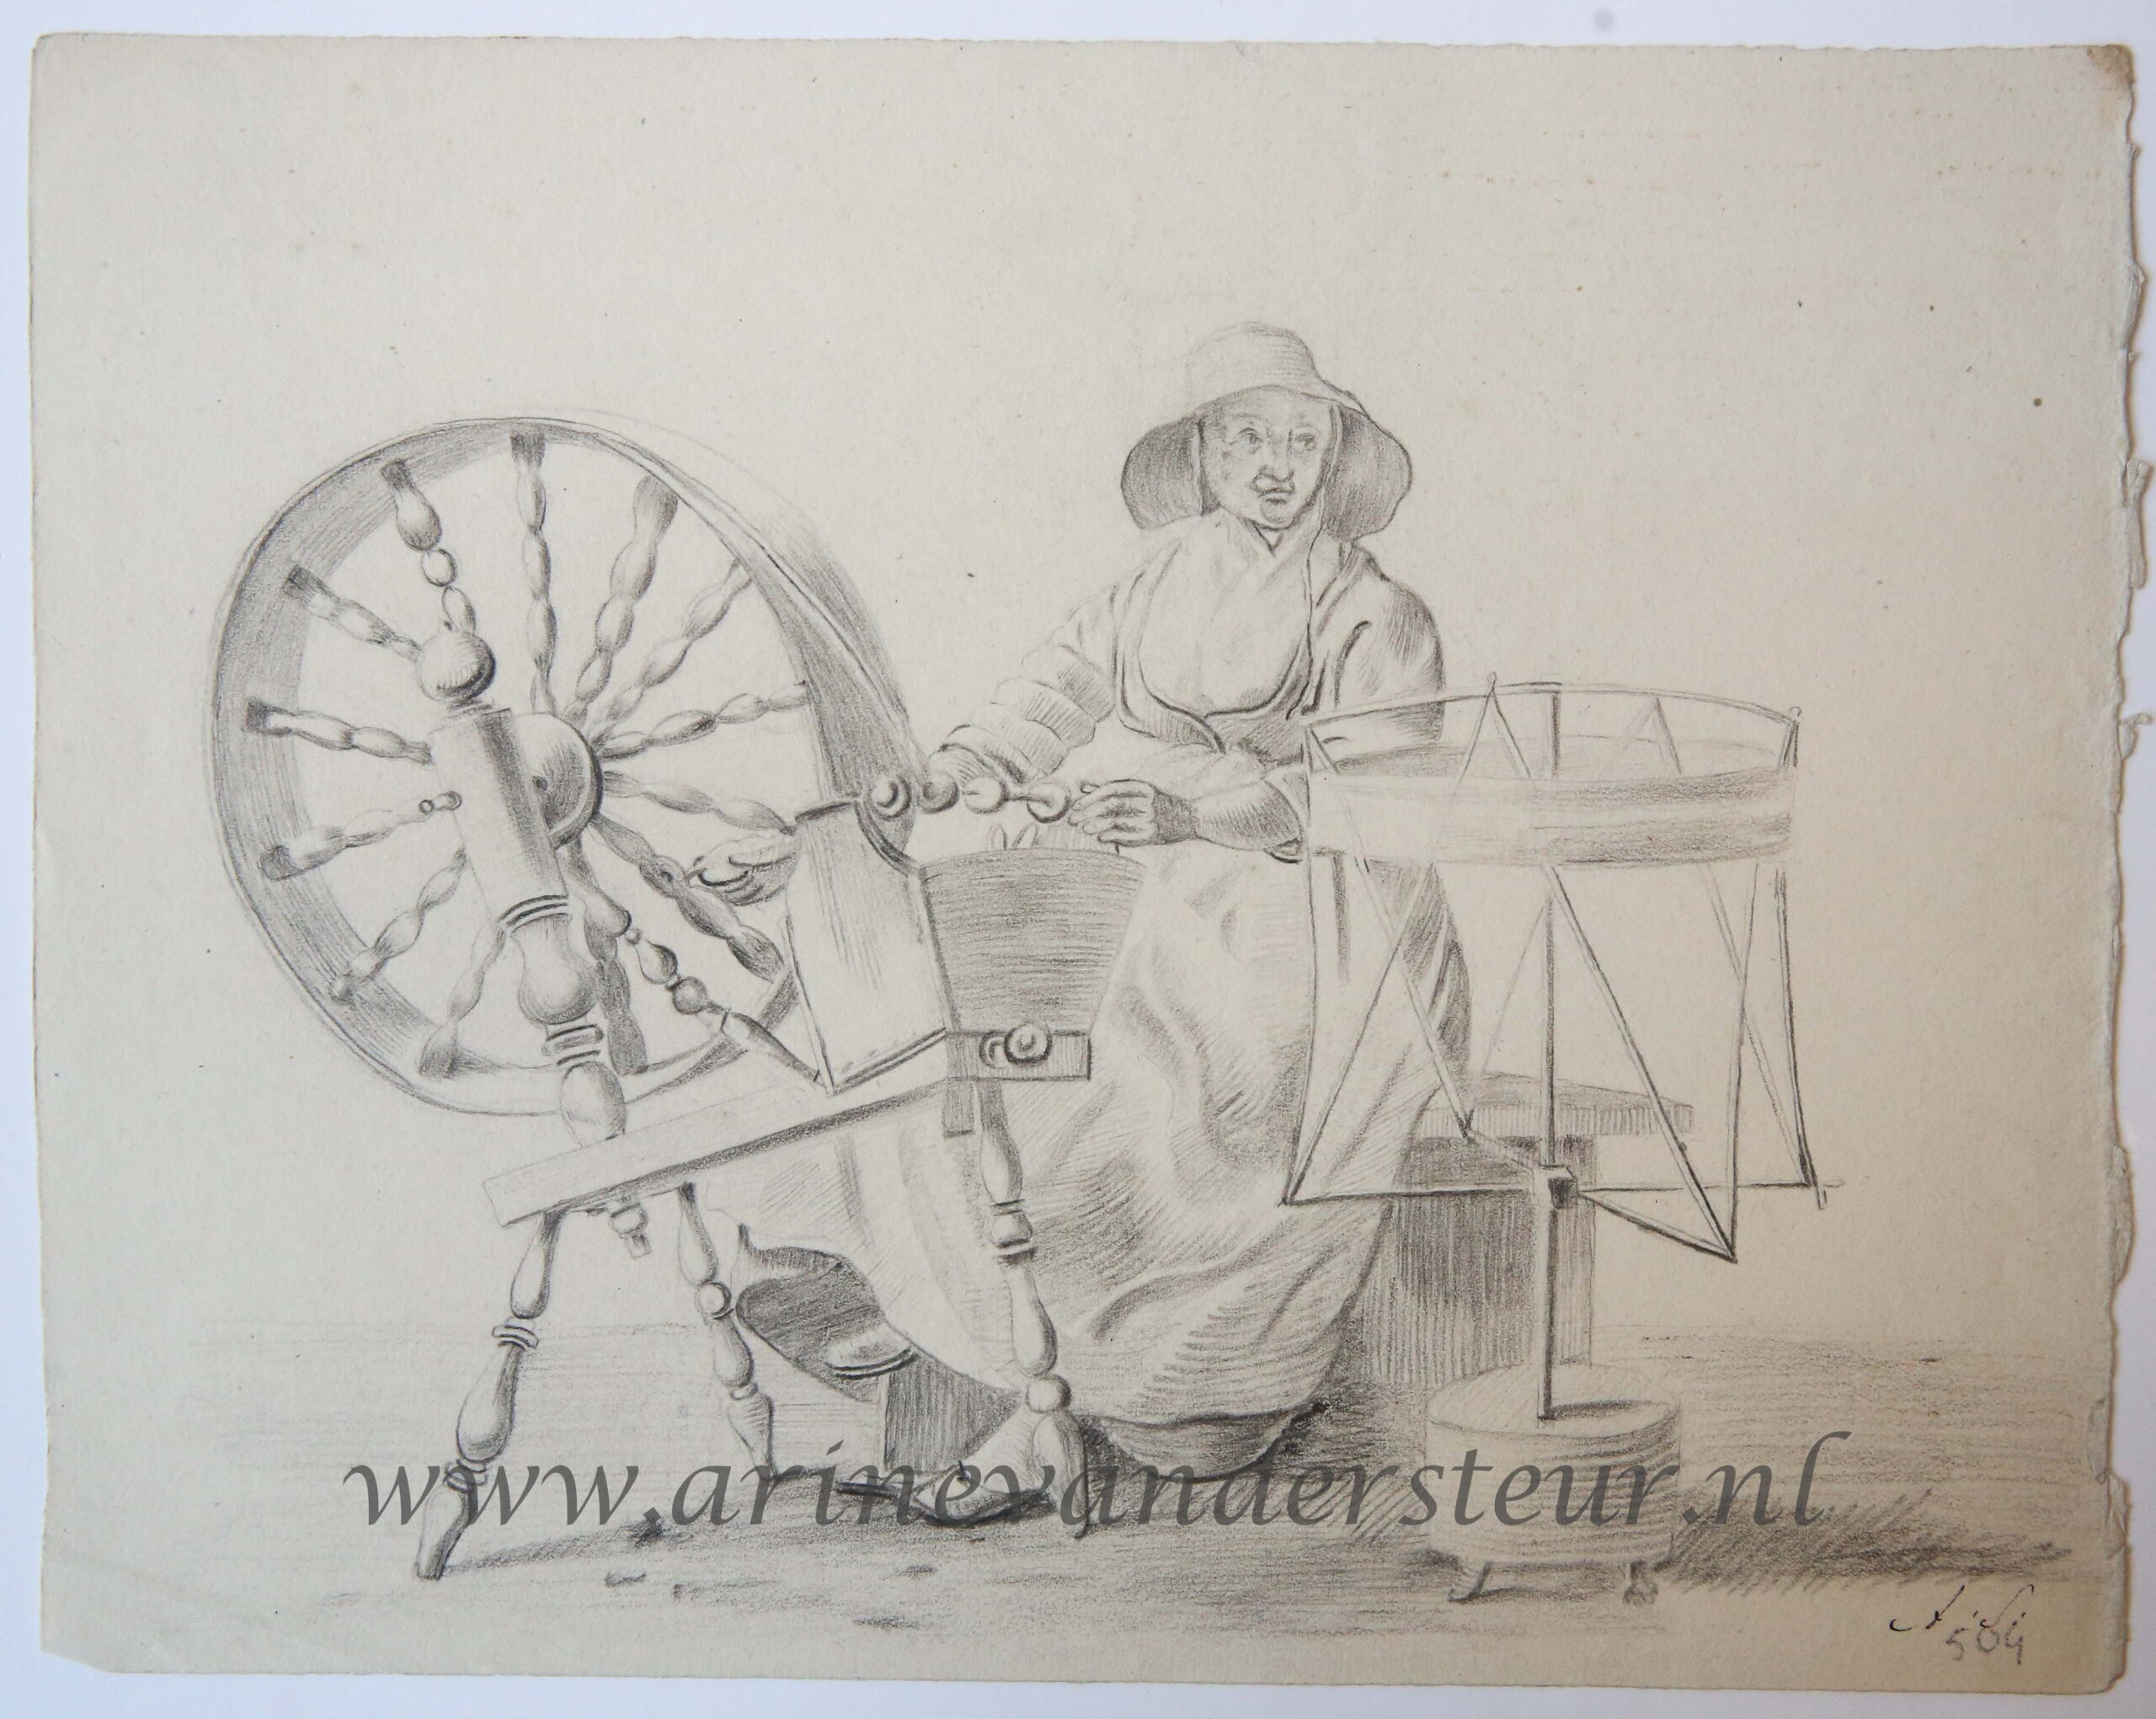 [Antique drawing] Woman at a spindle (vrouw bij spinnewiel), ca. 1850-1900.